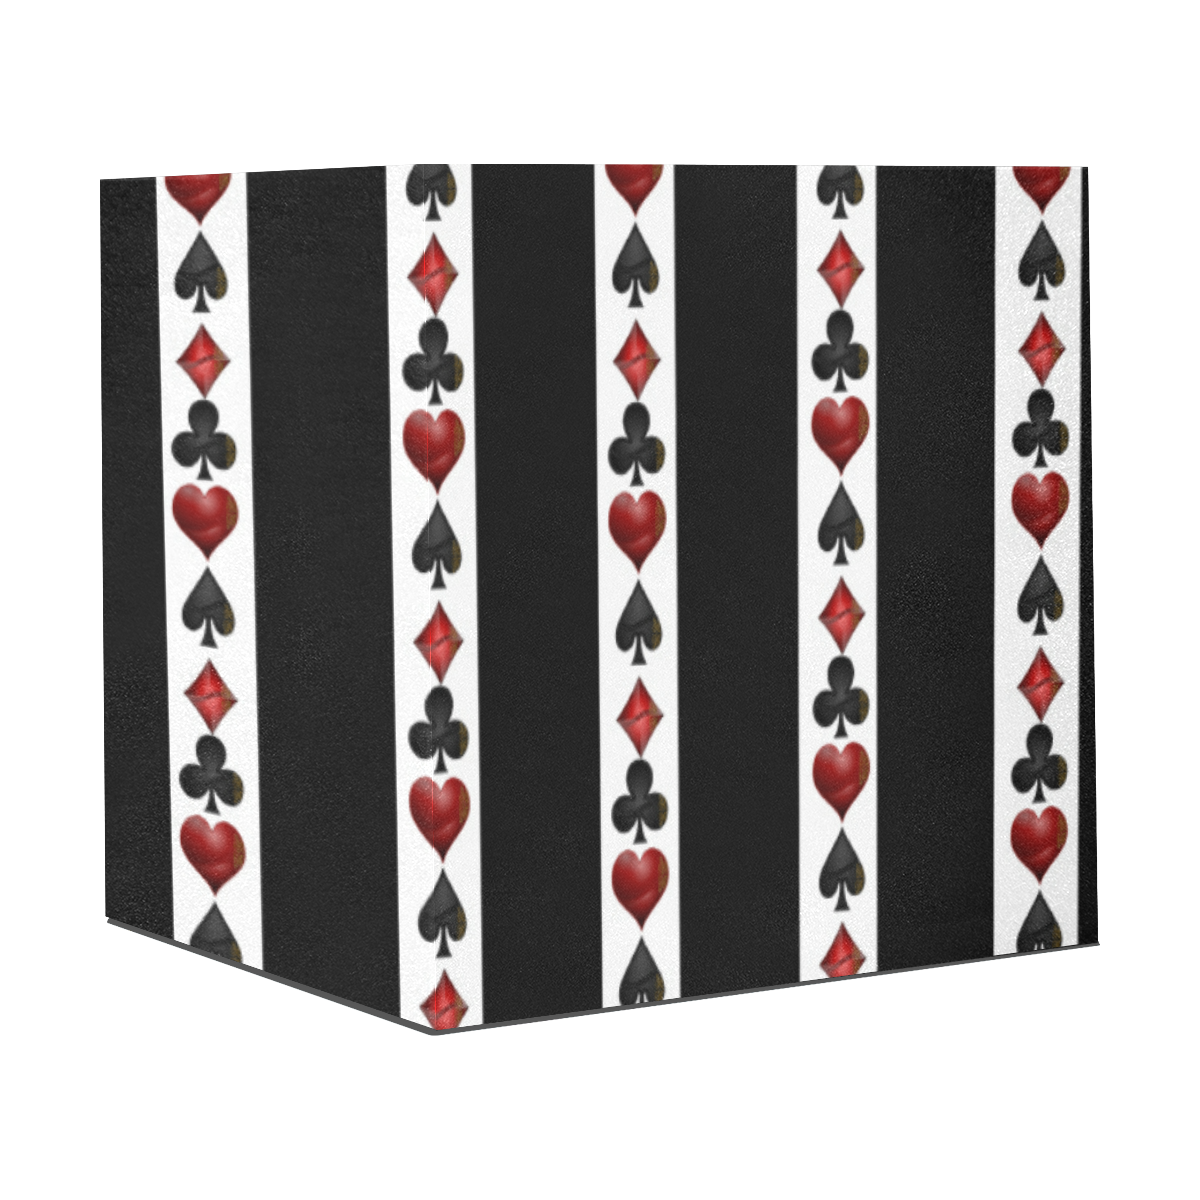 Playing Card Symbols Stripes Gift Wrapping Paper 58"x 23" (3 Rolls)